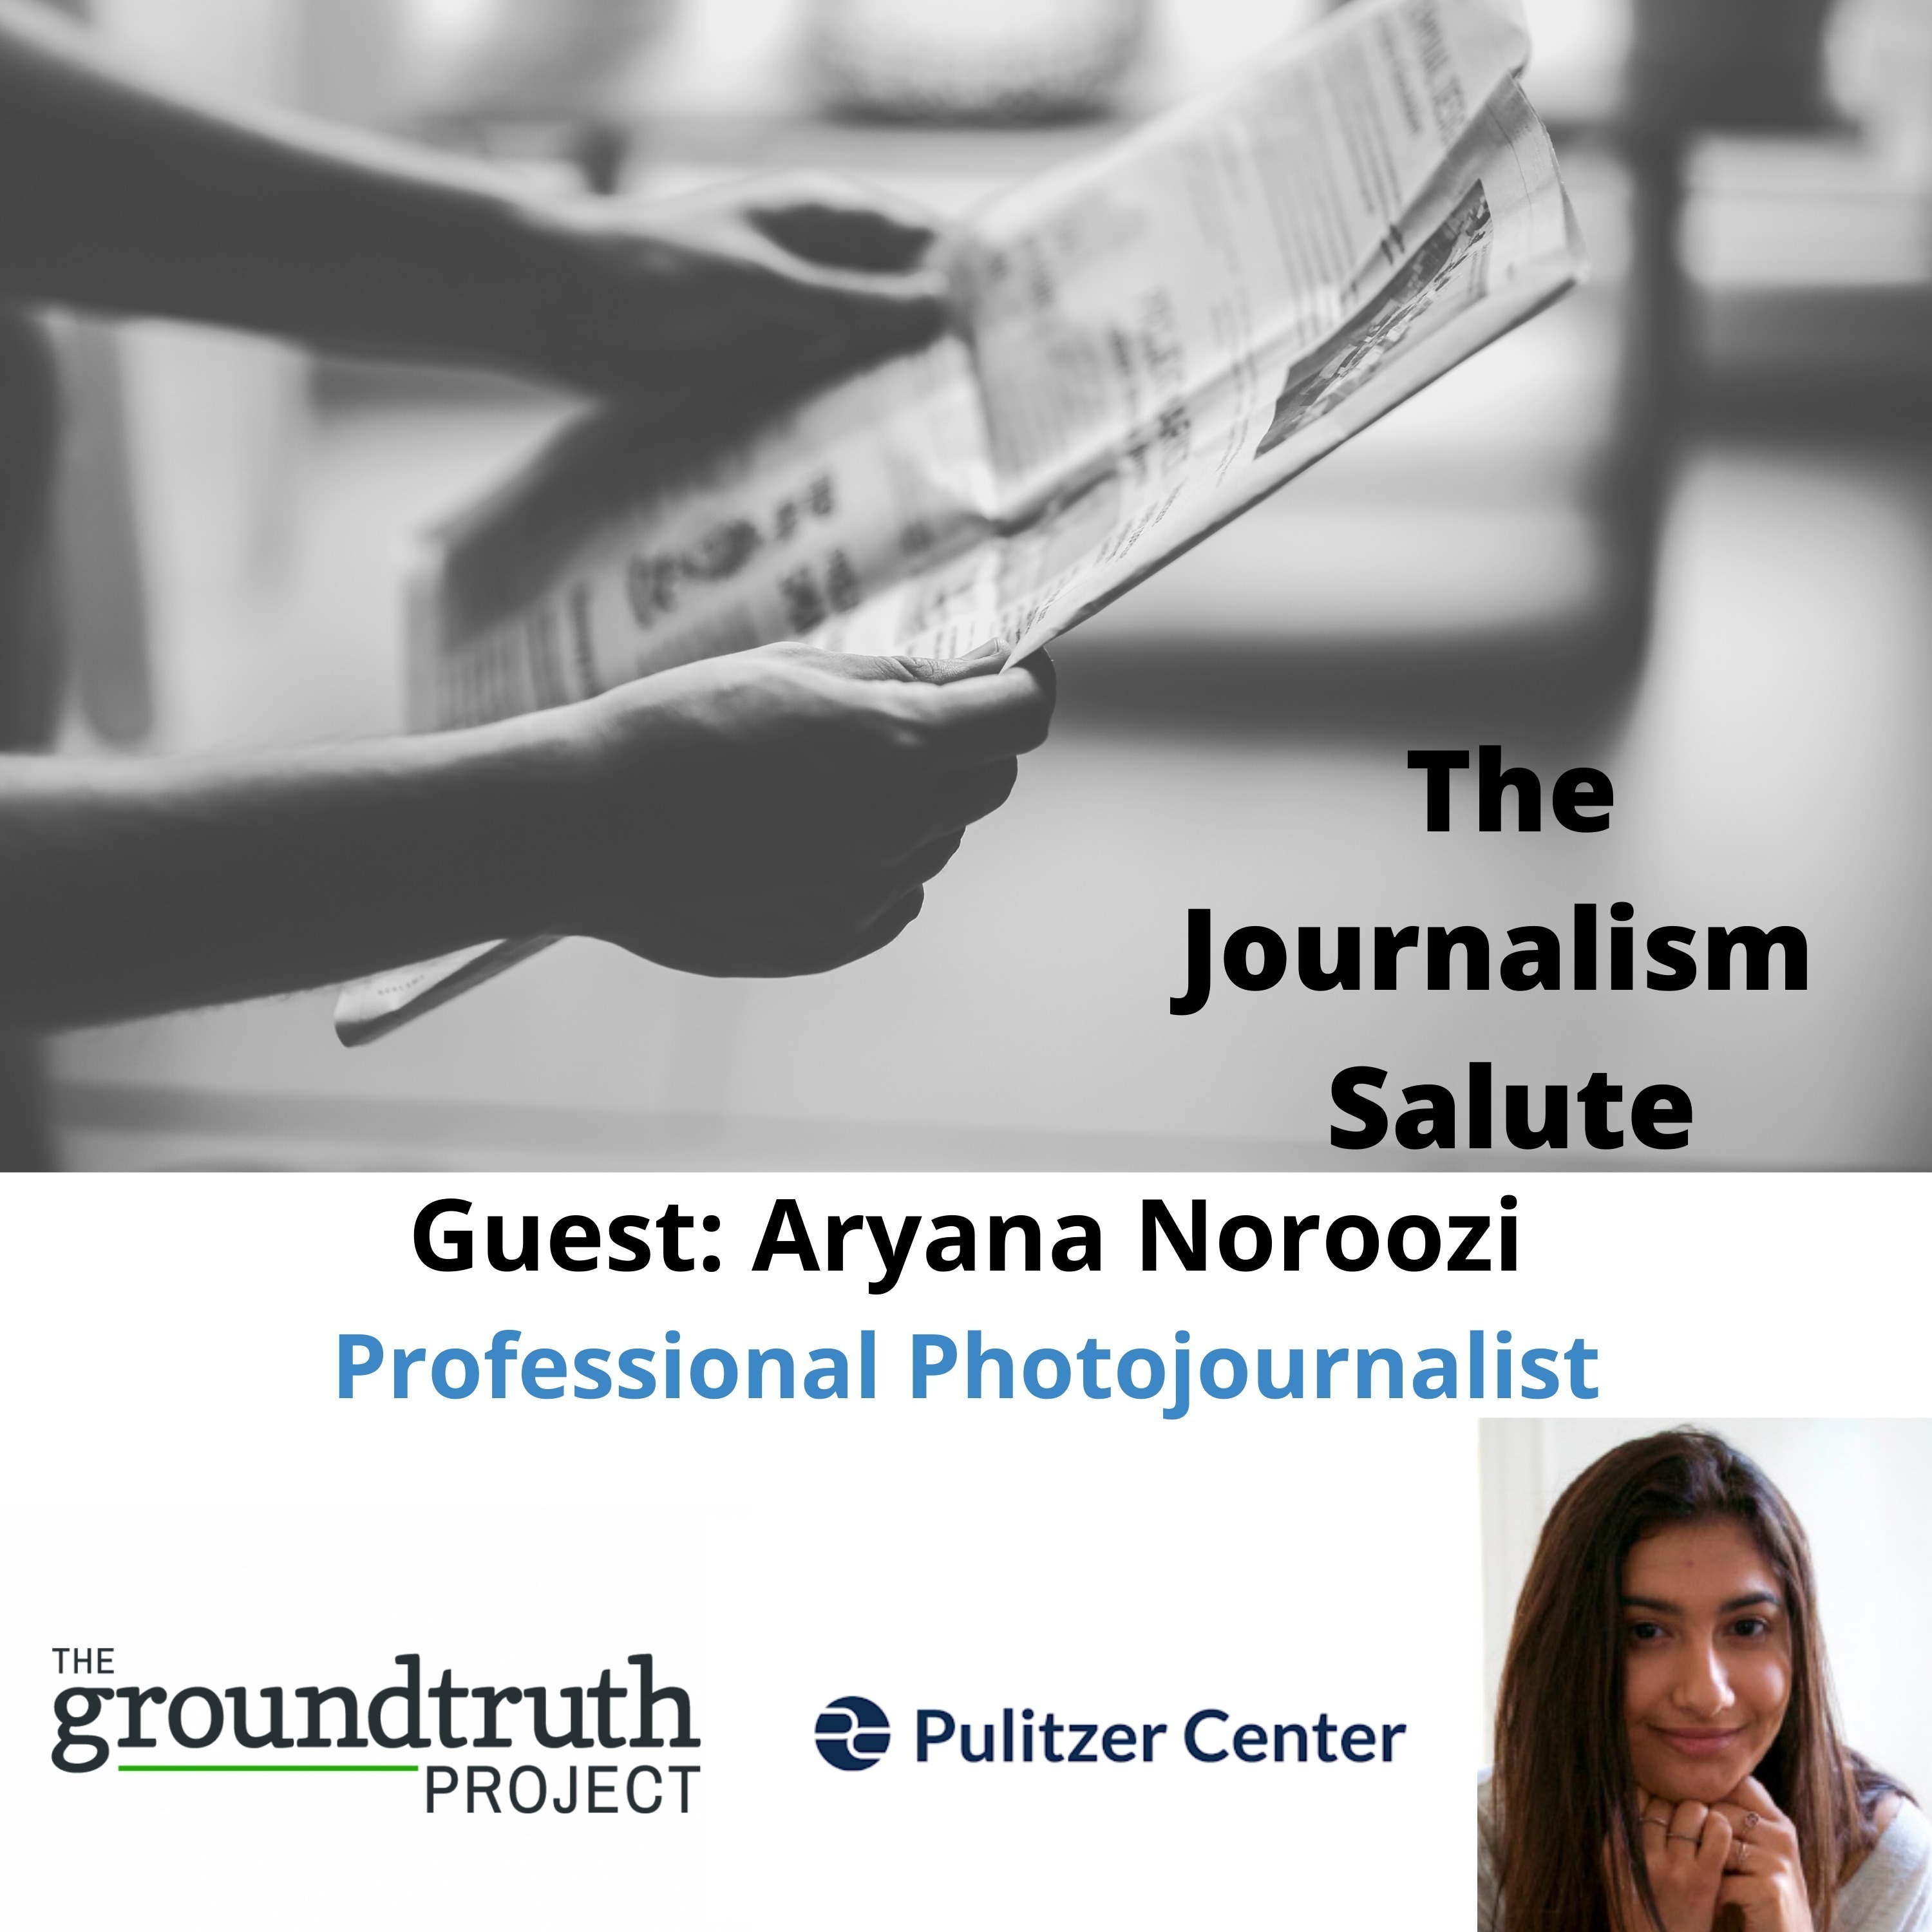 Photojournalist Aryana Noroozi of The GroundTruth Project and Pulitzer Center